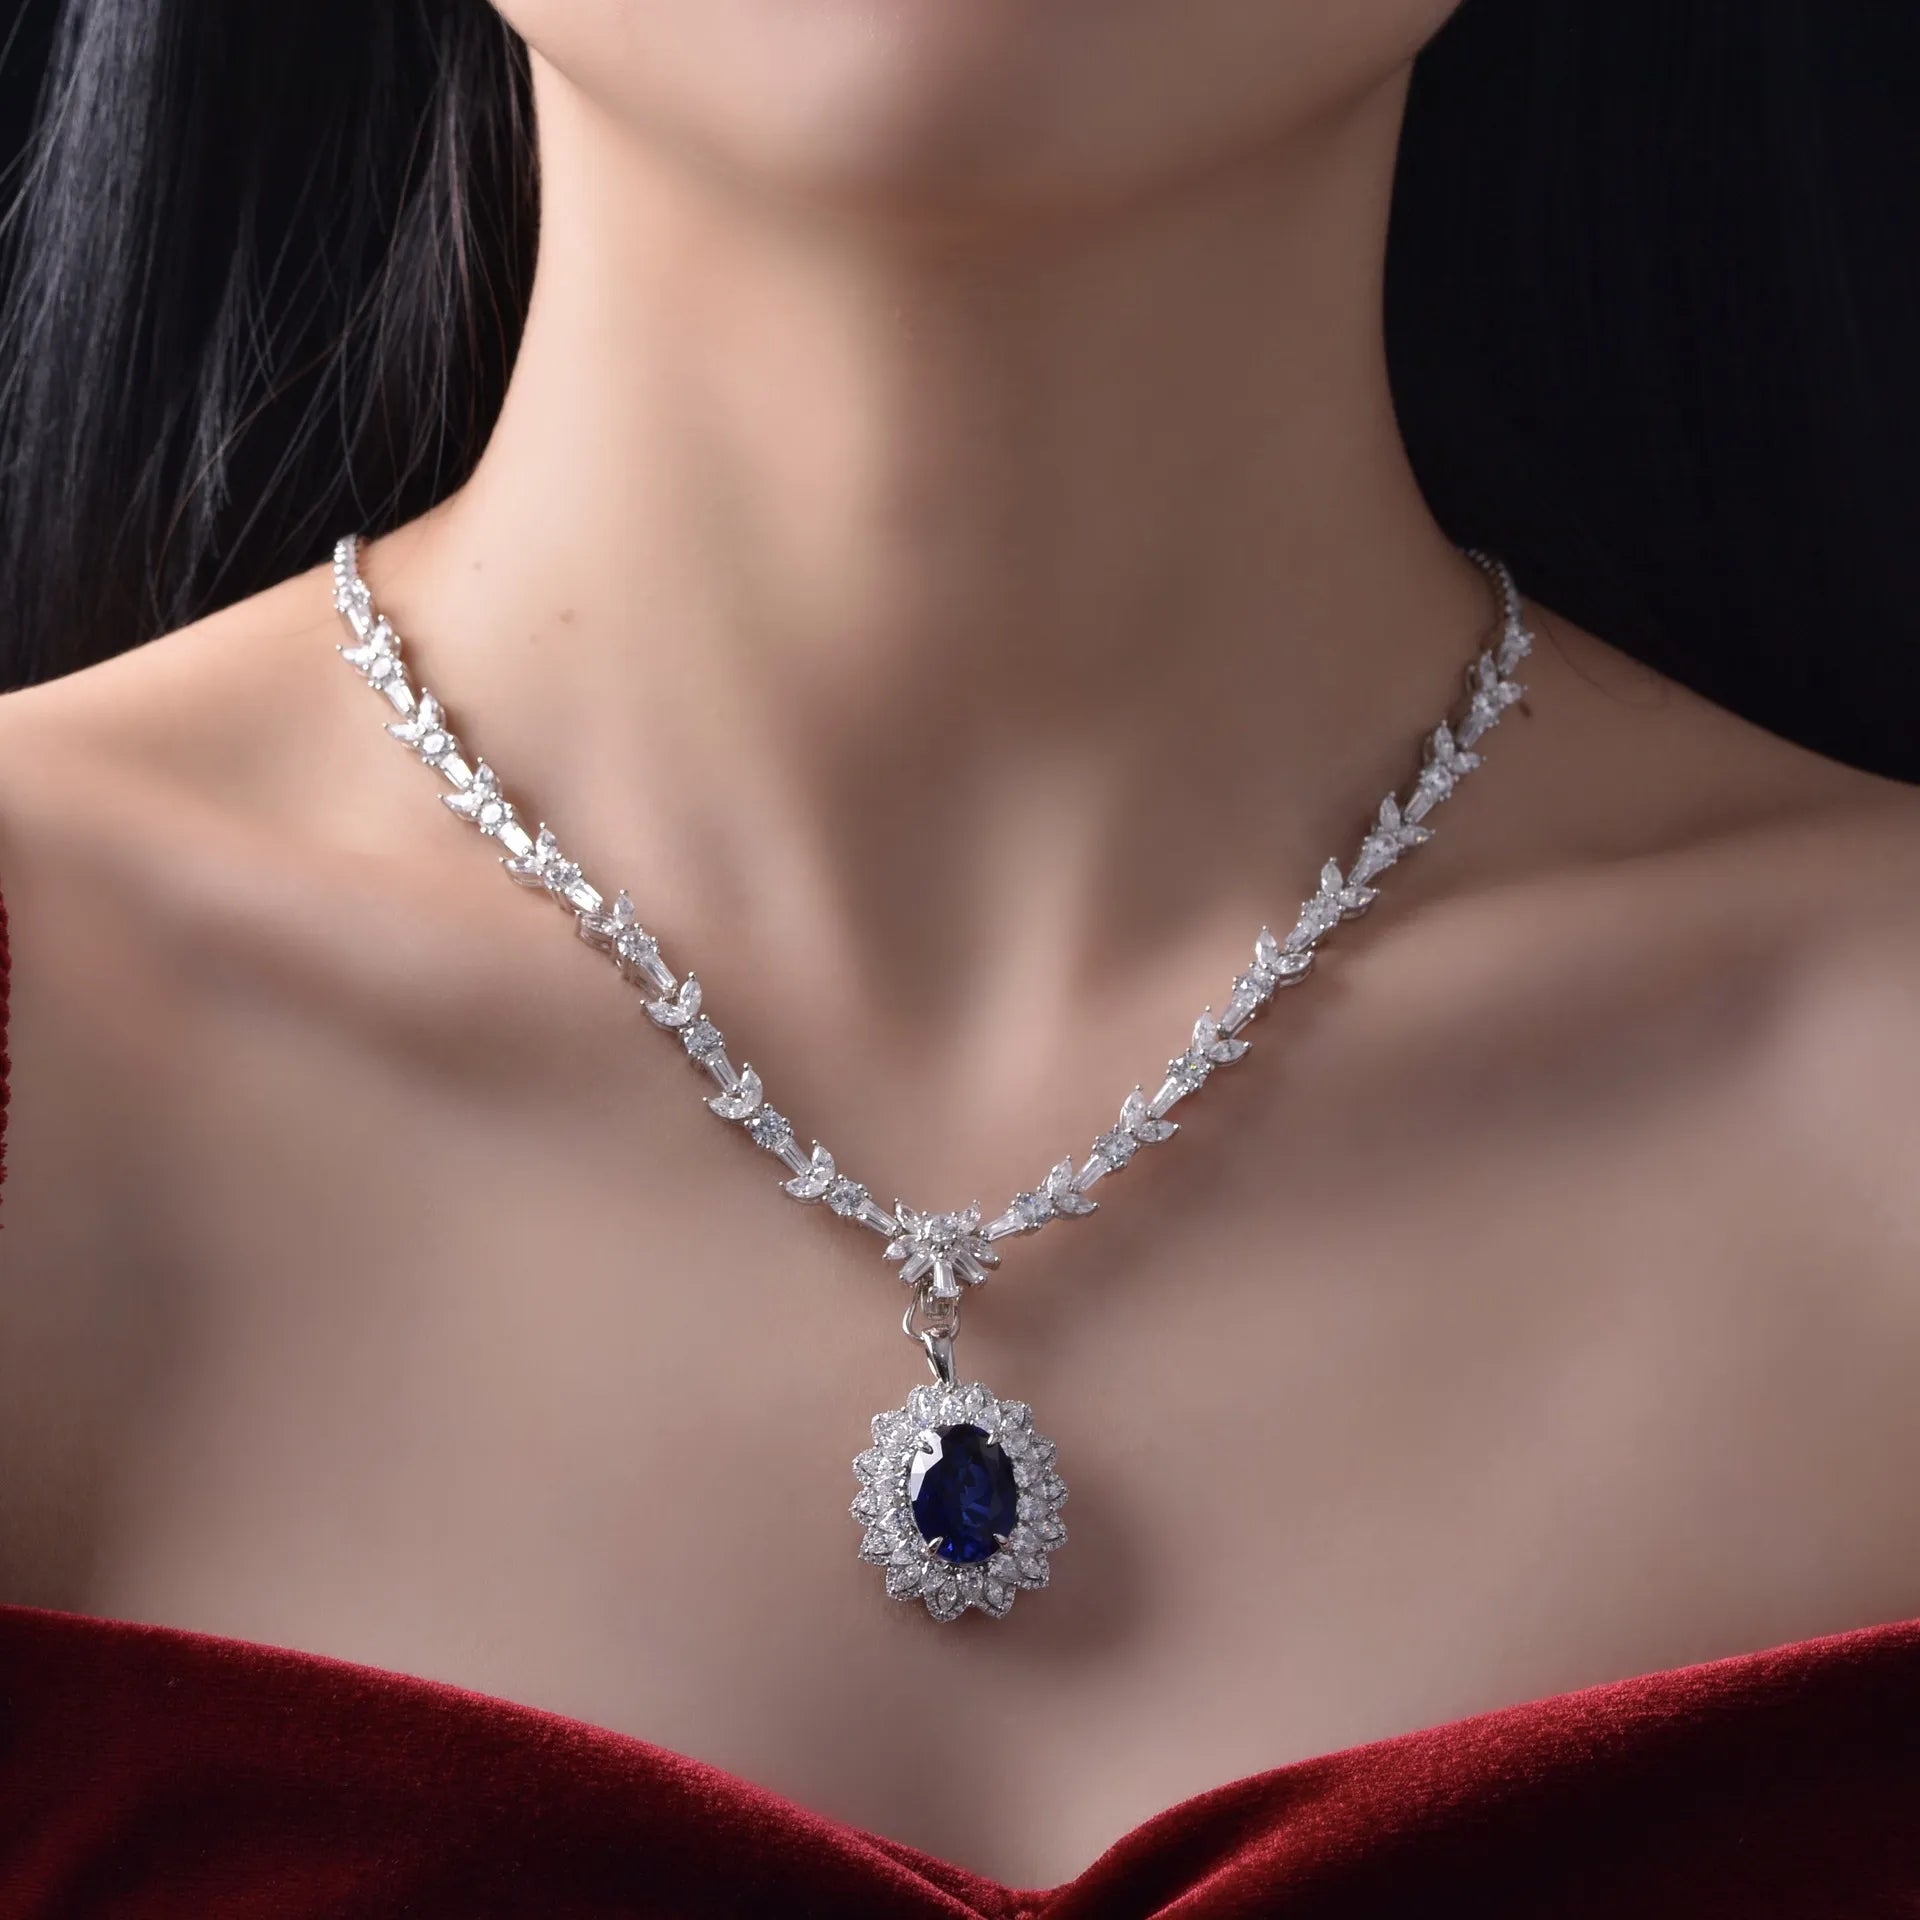 7.5 Carat Oval Cut Imitation Sapphire and Cubic Zirconia Royalty Inspired Necklace in Platinum-Plated Sterling Silver - Boutique Pavè